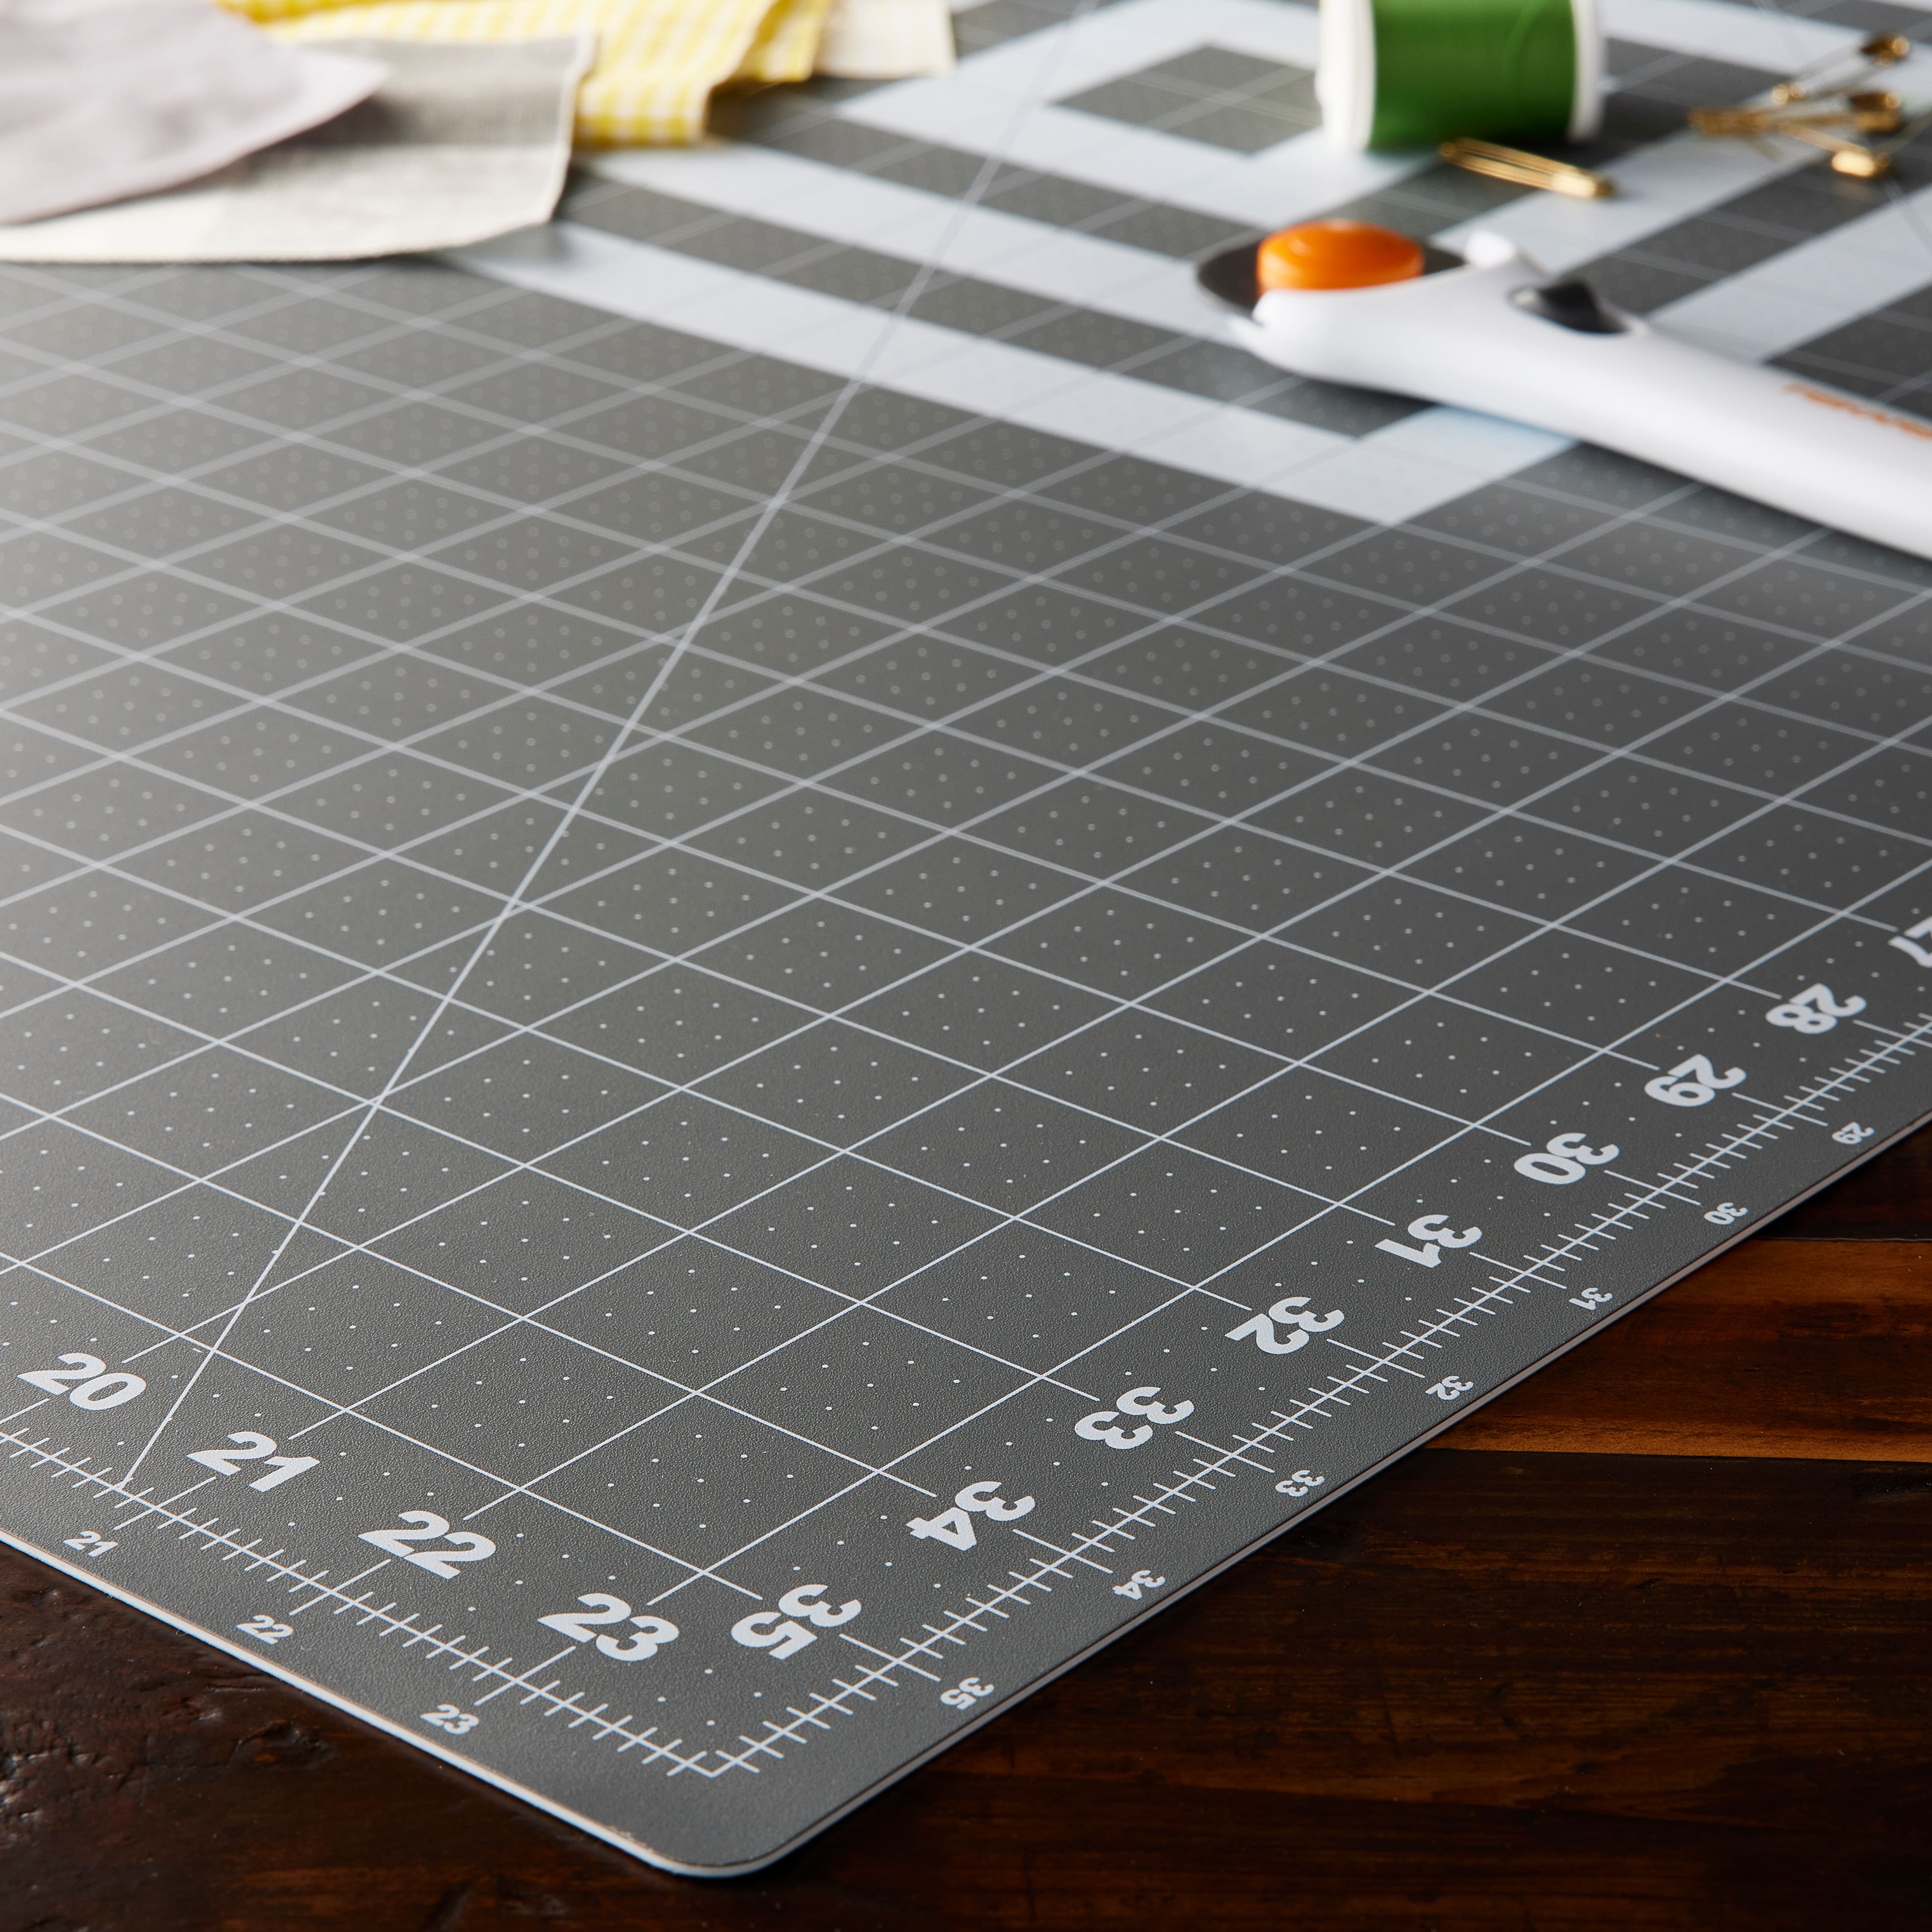 Solar-Flattening Fiskars Cutting Mats – The Smell of Molten Projects in the  Morning